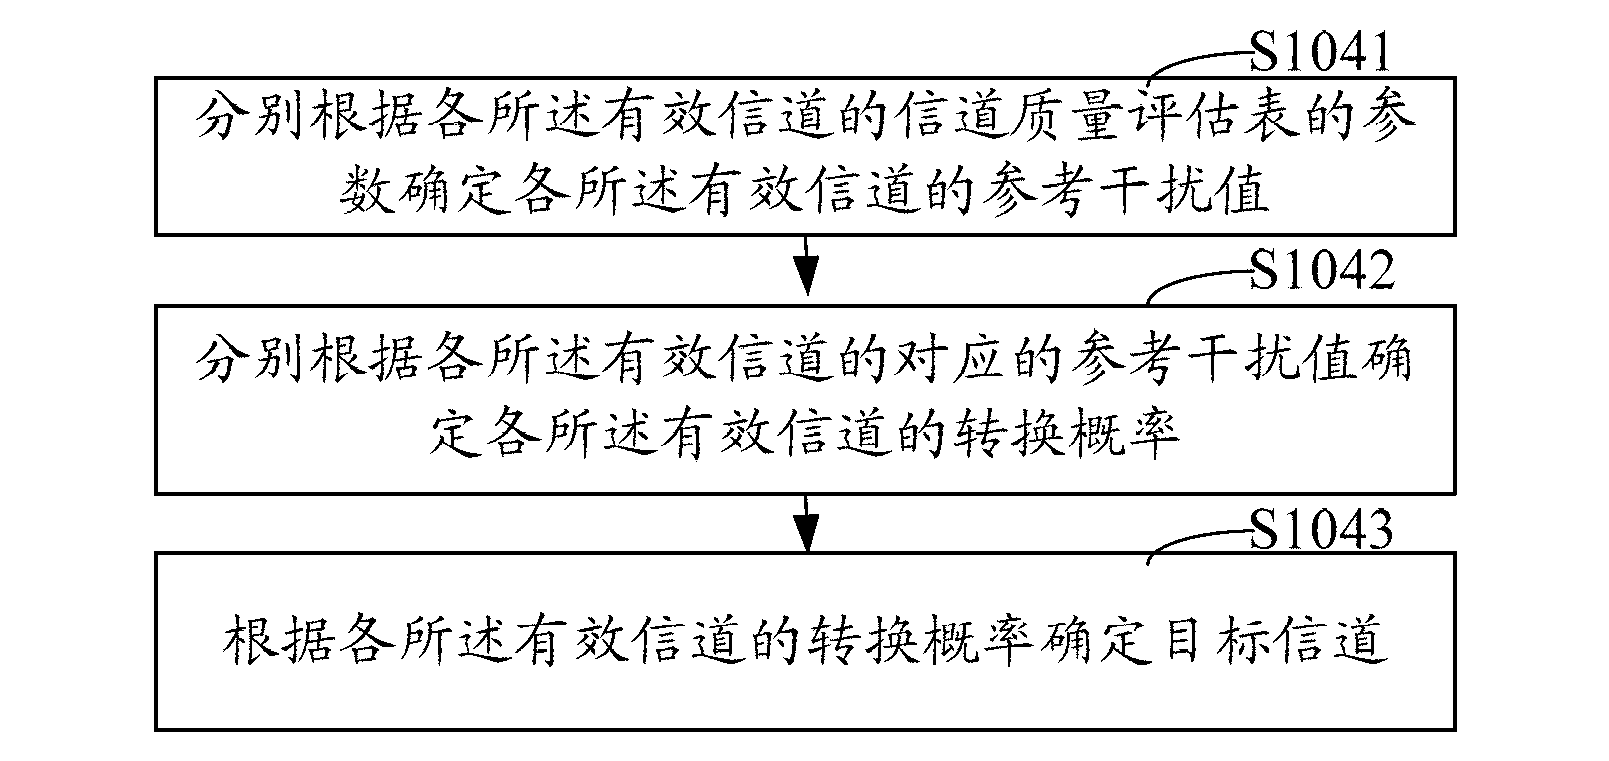 Method and system for automatically distributing wireless communication channels